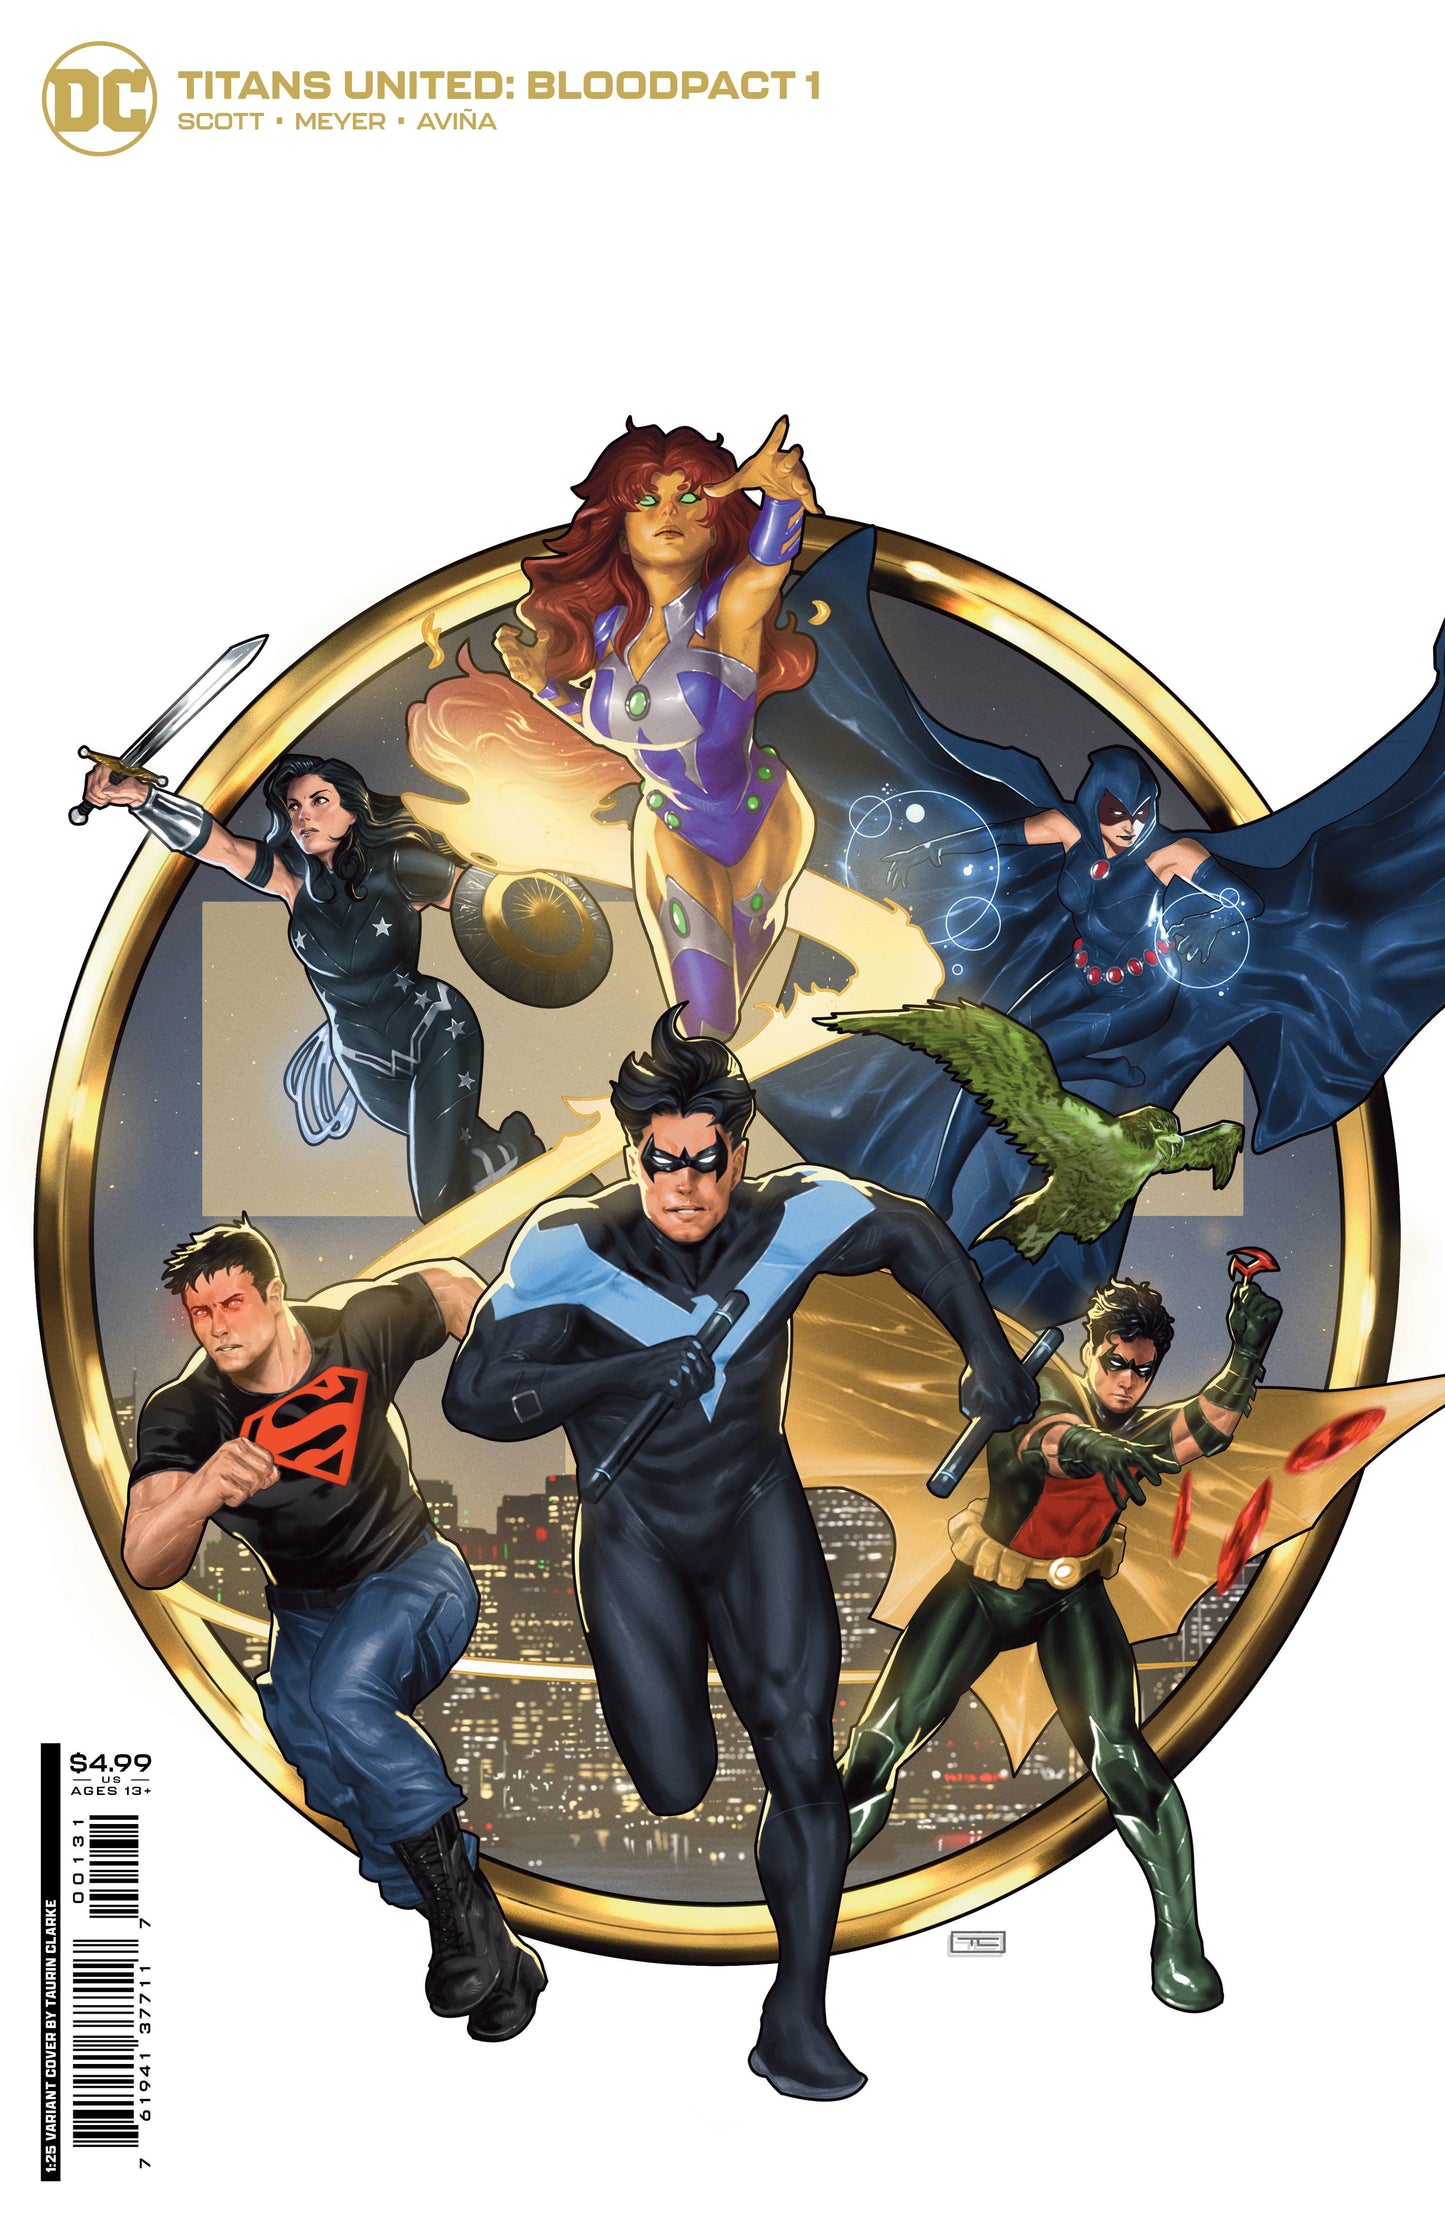 TITANS UNITED BLOODPACT #1 (OF 6)